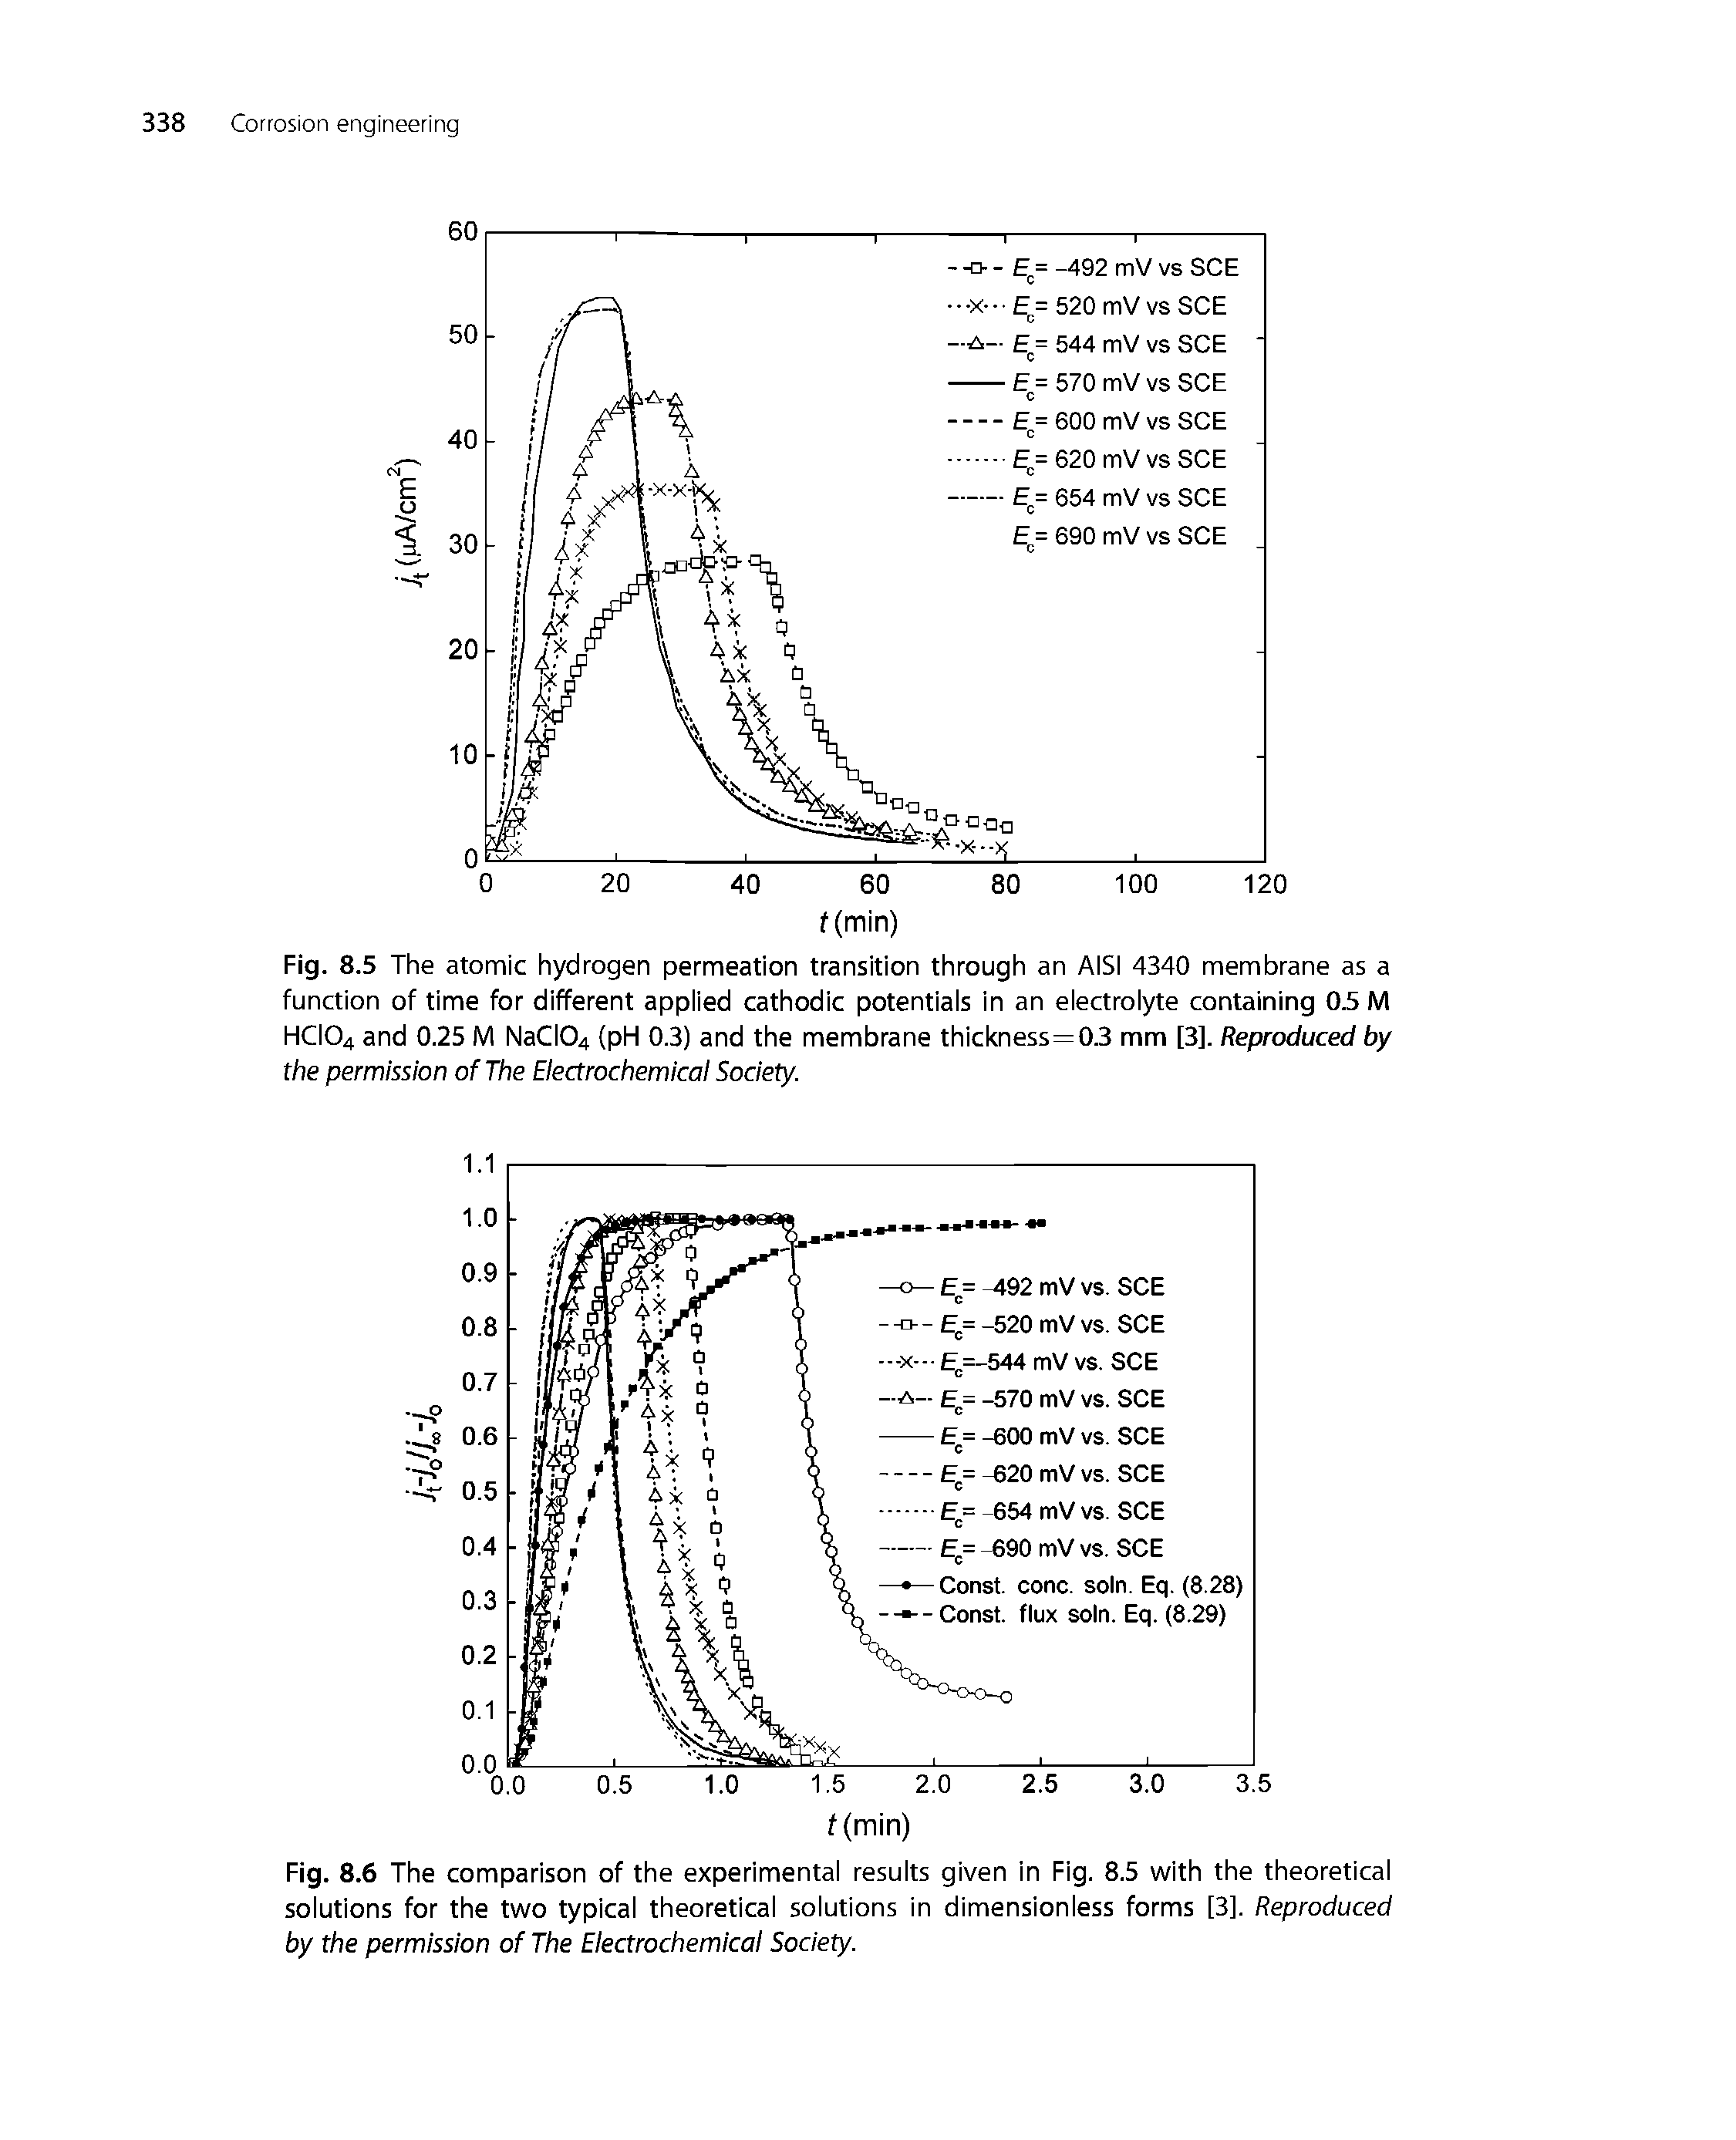 Fig. 8.5 The atomic hydrogen permeation transition through an AiSi 4340 membrane as a function of time for different appiied cathodic potentiais in an eiectroiyte containing 0.5 M HCi04 and 0.25 M NaCi04 (pH 0.3) and the membrane thickness=0.3 mm [3]. Reproduced by the permission of The Eiectrochemicai Society.